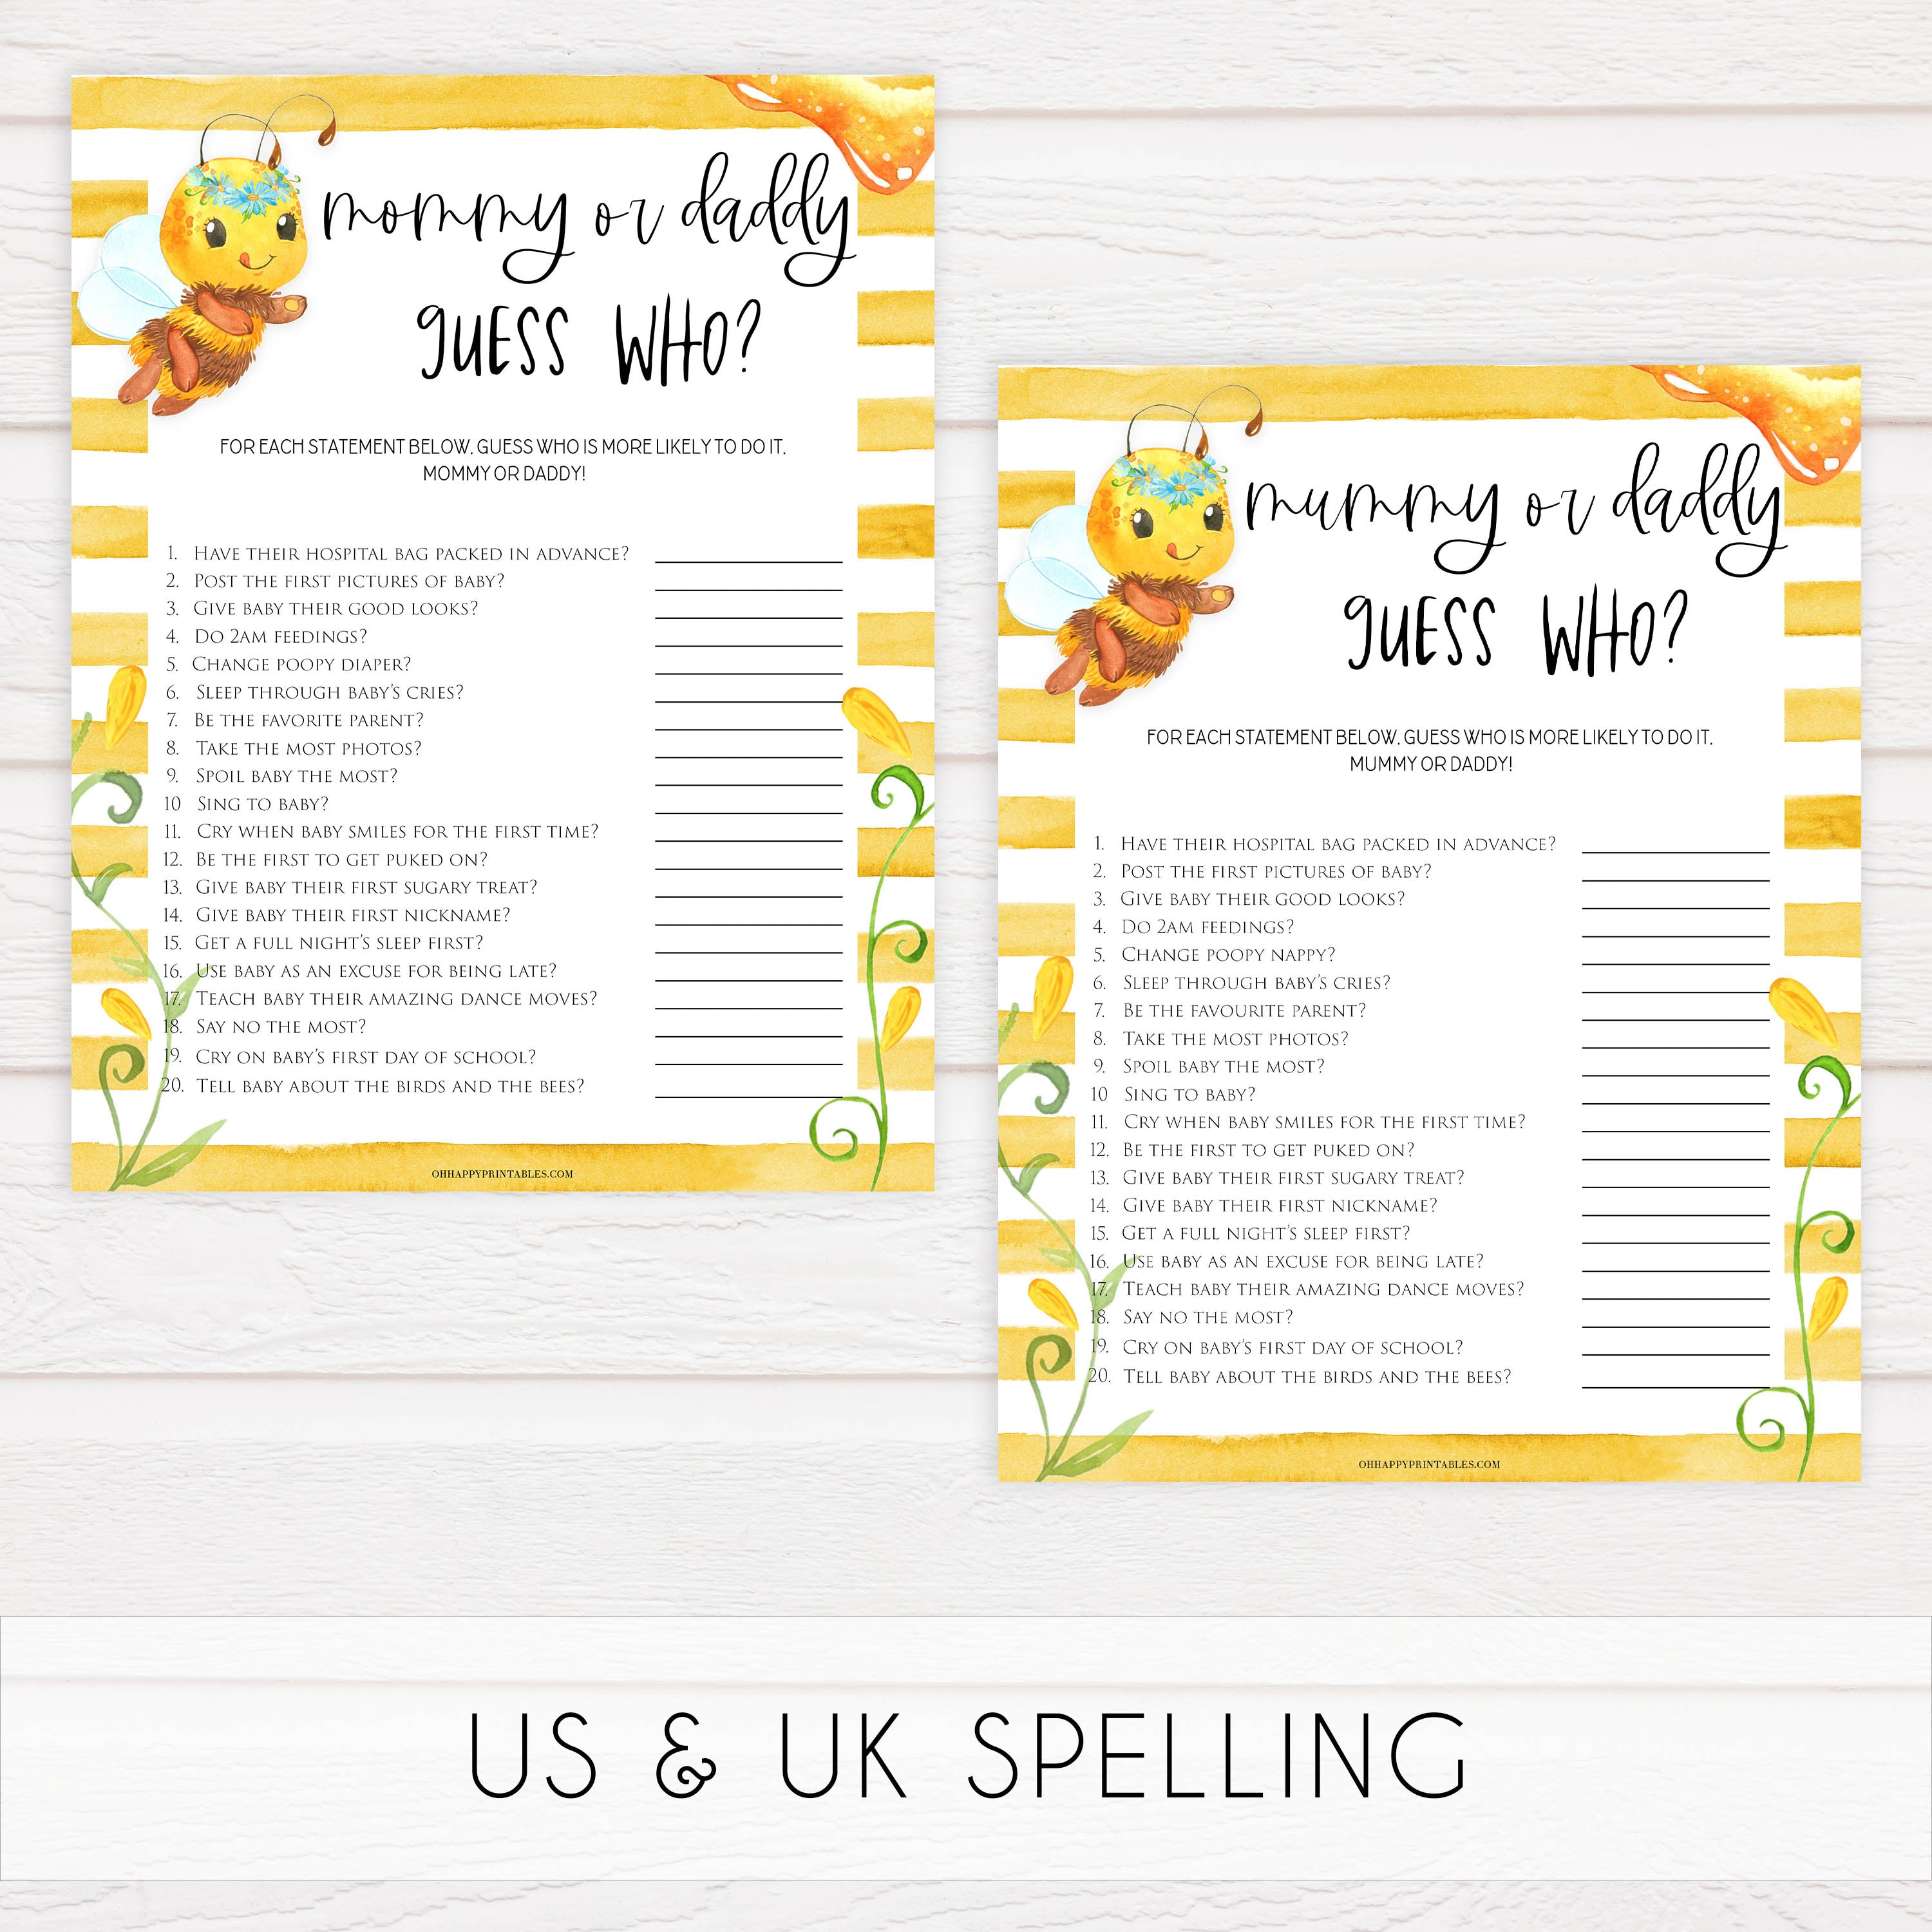 guess who mommy or daddy game, Printable baby shower games, mommy bee fun baby games, baby shower games, fun baby shower ideas, top baby shower ideas, mommy to bee baby shower, friends baby shower ideas